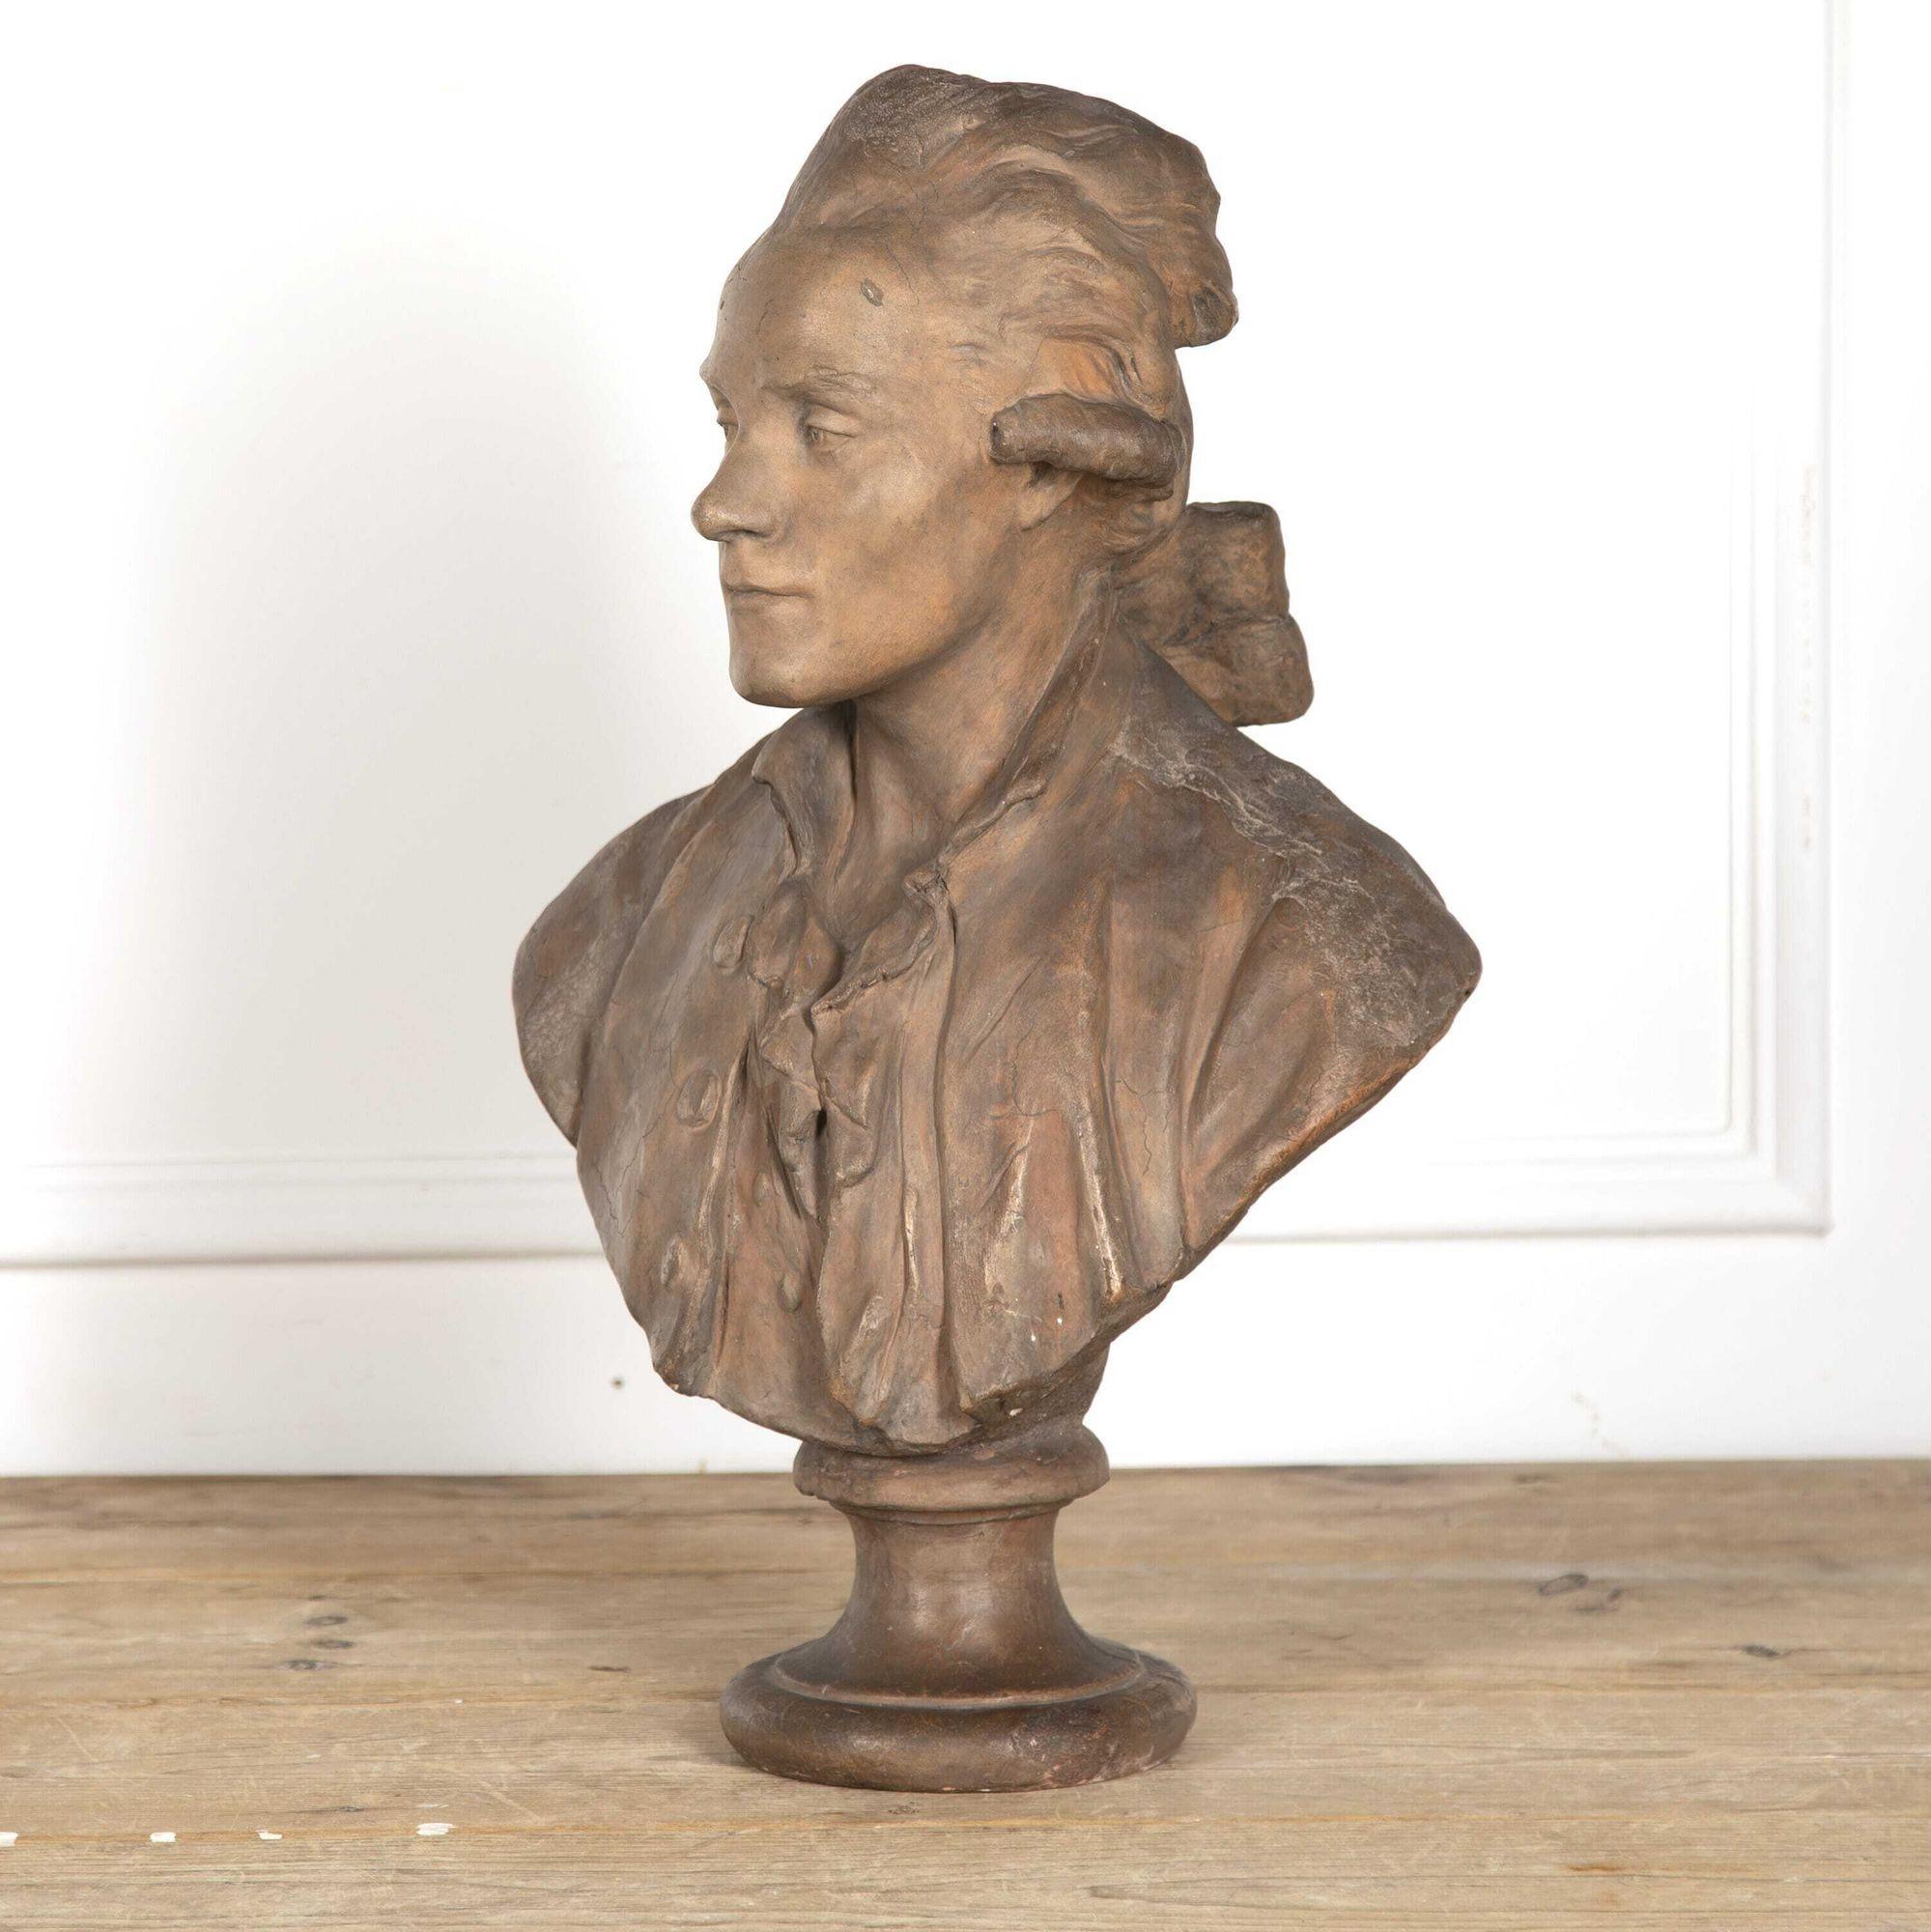 After a model attributed to Jean Antoine Houdon, of the poet Nicolas Joseph Laurent Gilbert (1750 - 1780).
Superbly sculpted in a coat and ruffled shirt set on a waisted socle.
The rear of the bust amazingly shows the sculptor's thumbprints where